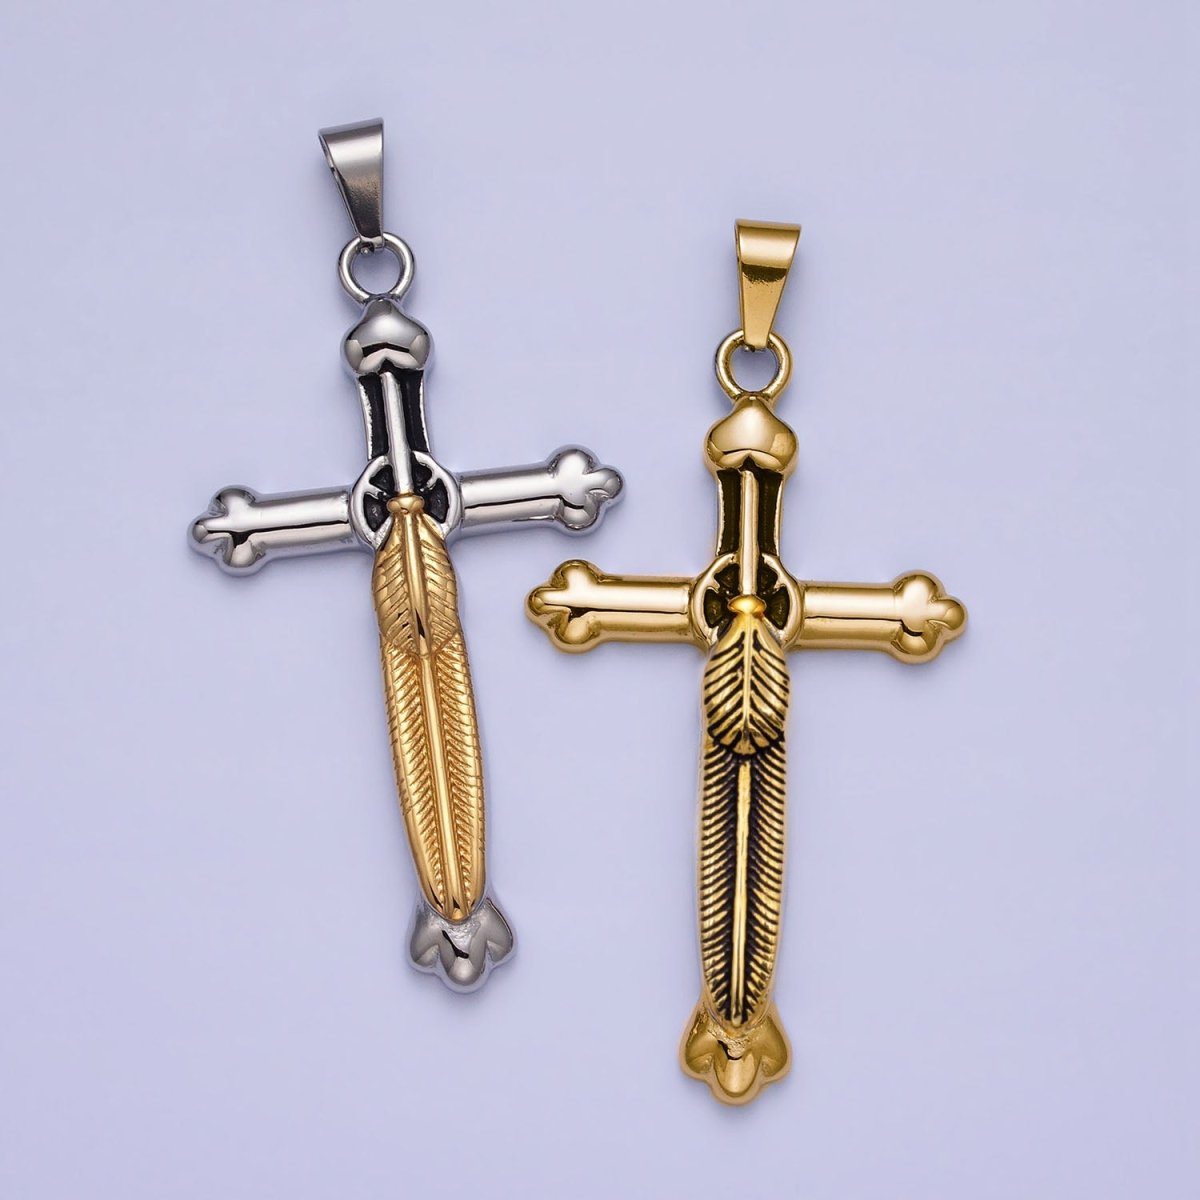 Stainless Steel Budded Buttony Feather 66mm Cross in Mixed Metal & Gold J-715 AB-1397 - DLUXCA